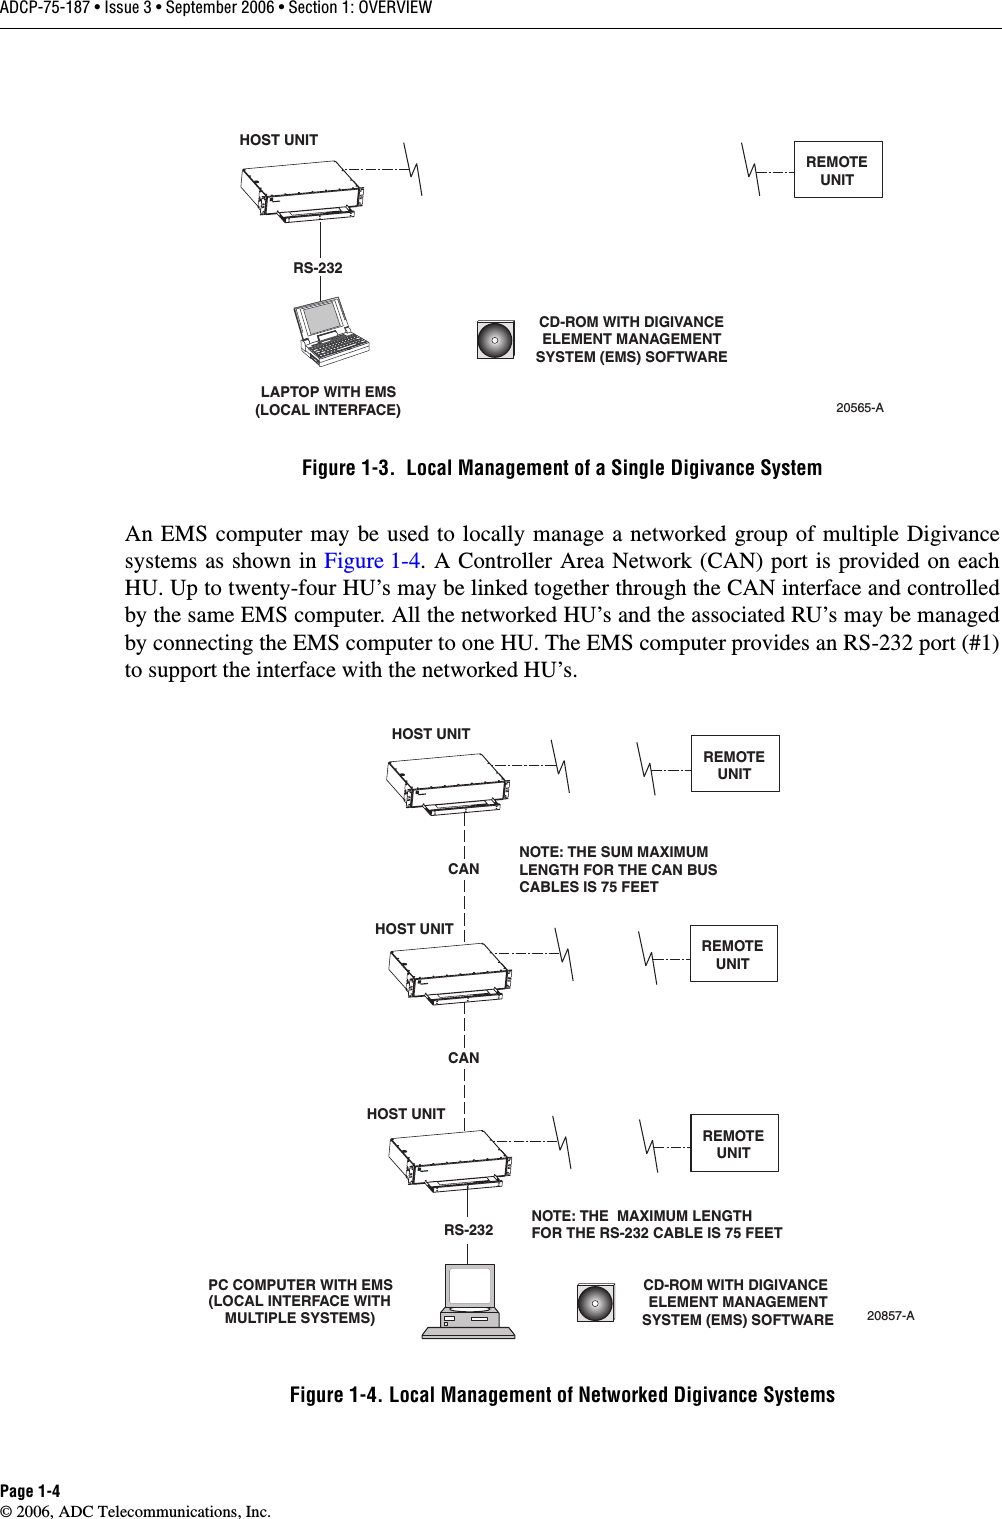 ADCP-75-187 • Issue 3 • September 2006 • Section 1: OVERVIEWPage 1-4© 2006, ADC Telecommunications, Inc.Figure 1-3.  Local Management of a Single Digivance SystemAn EMS computer may be used to locally manage a networked group of multiple Digivancesystems as shown in Figure 1-4. A Controller Area Network (CAN) port is provided on eachHU. Up to twenty-four HU’s may be linked together through the CAN interface and controlledby the same EMS computer. All the networked HU’s and the associated RU’s may be managedby connecting the EMS computer to one HU. The EMS computer provides an RS-232 port (#1)to support the interface with the networked HU’s. Figure 1-4. Local Management of Networked Digivance SystemsHOST UNITLAPTOP WITH EMS(LOCAL INTERFACE)20565-ACD-ROM WITH DIGIVANCEELEMENT MANAGEMENTSYSTEM (EMS) SOFTWAREREMOTEUNITRS-232PC COMPUTER WITH EMS(LOCAL INTERFACE WITHMULTIPLE SYSTEMS)HOST UNITHOST UNITHOST UNITRS-23220857-ACD-ROM WITH DIGIVANCE ELEMENT MANAGEMENTSYSTEM (EMS) SOFTWARECANCANREMOTEUNITREMOTEUNITREMOTEUNITNOTE: THE  MAXIMUM LENGTHFOR THE RS-232 CABLE IS 75 FEETNOTE: THE SUM MAXIMUMLENGTH FOR THE CAN BUSCABLES IS 75 FEET